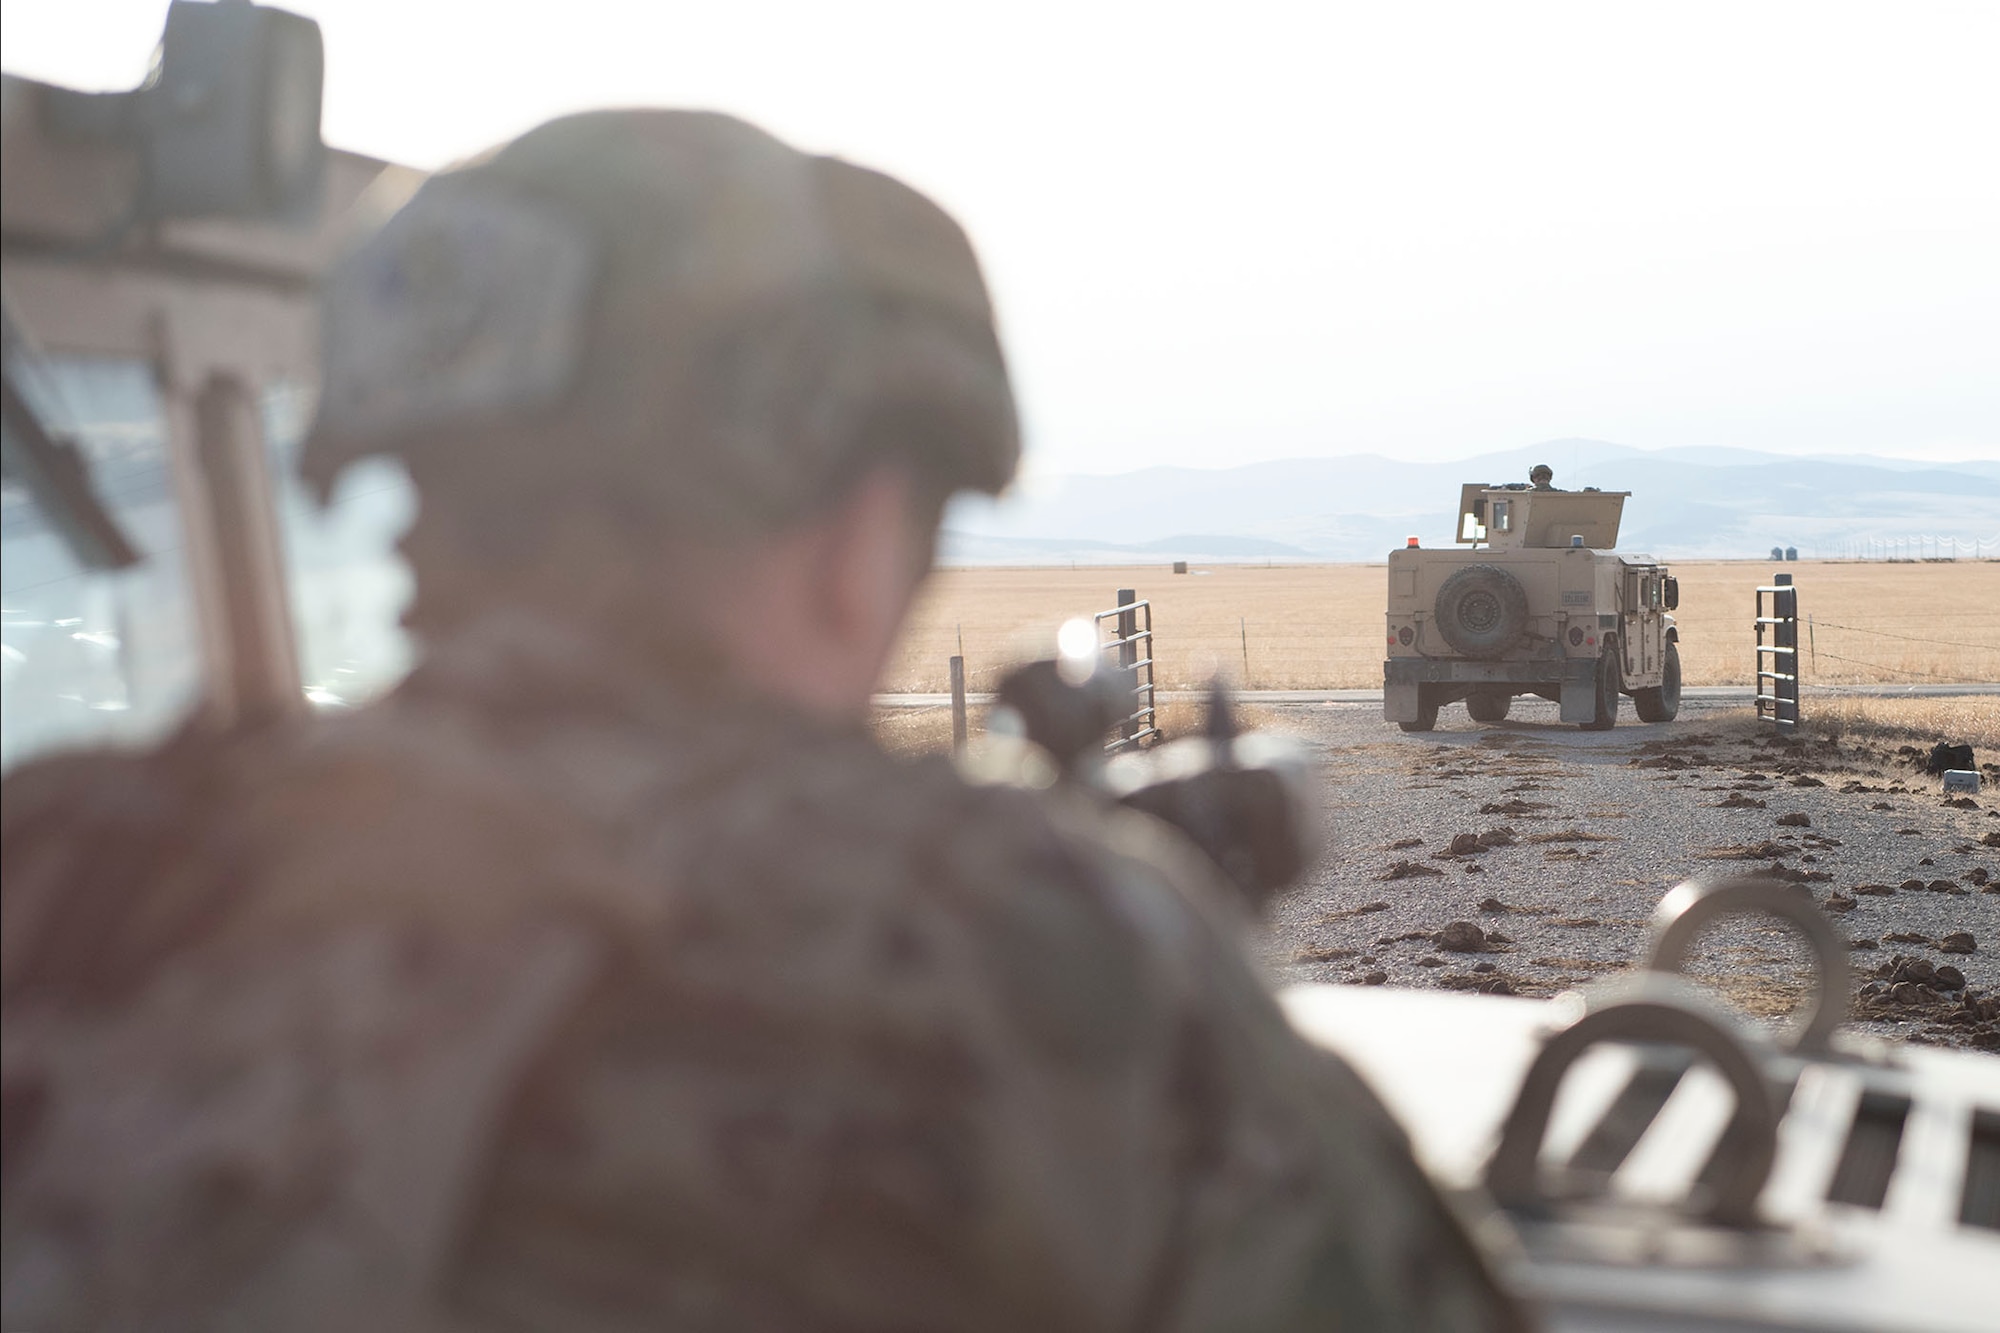 A defender leans against a humvee with his rifle pointing out in front of him (blurred) and in the forefront is a humvee driving off into the distance